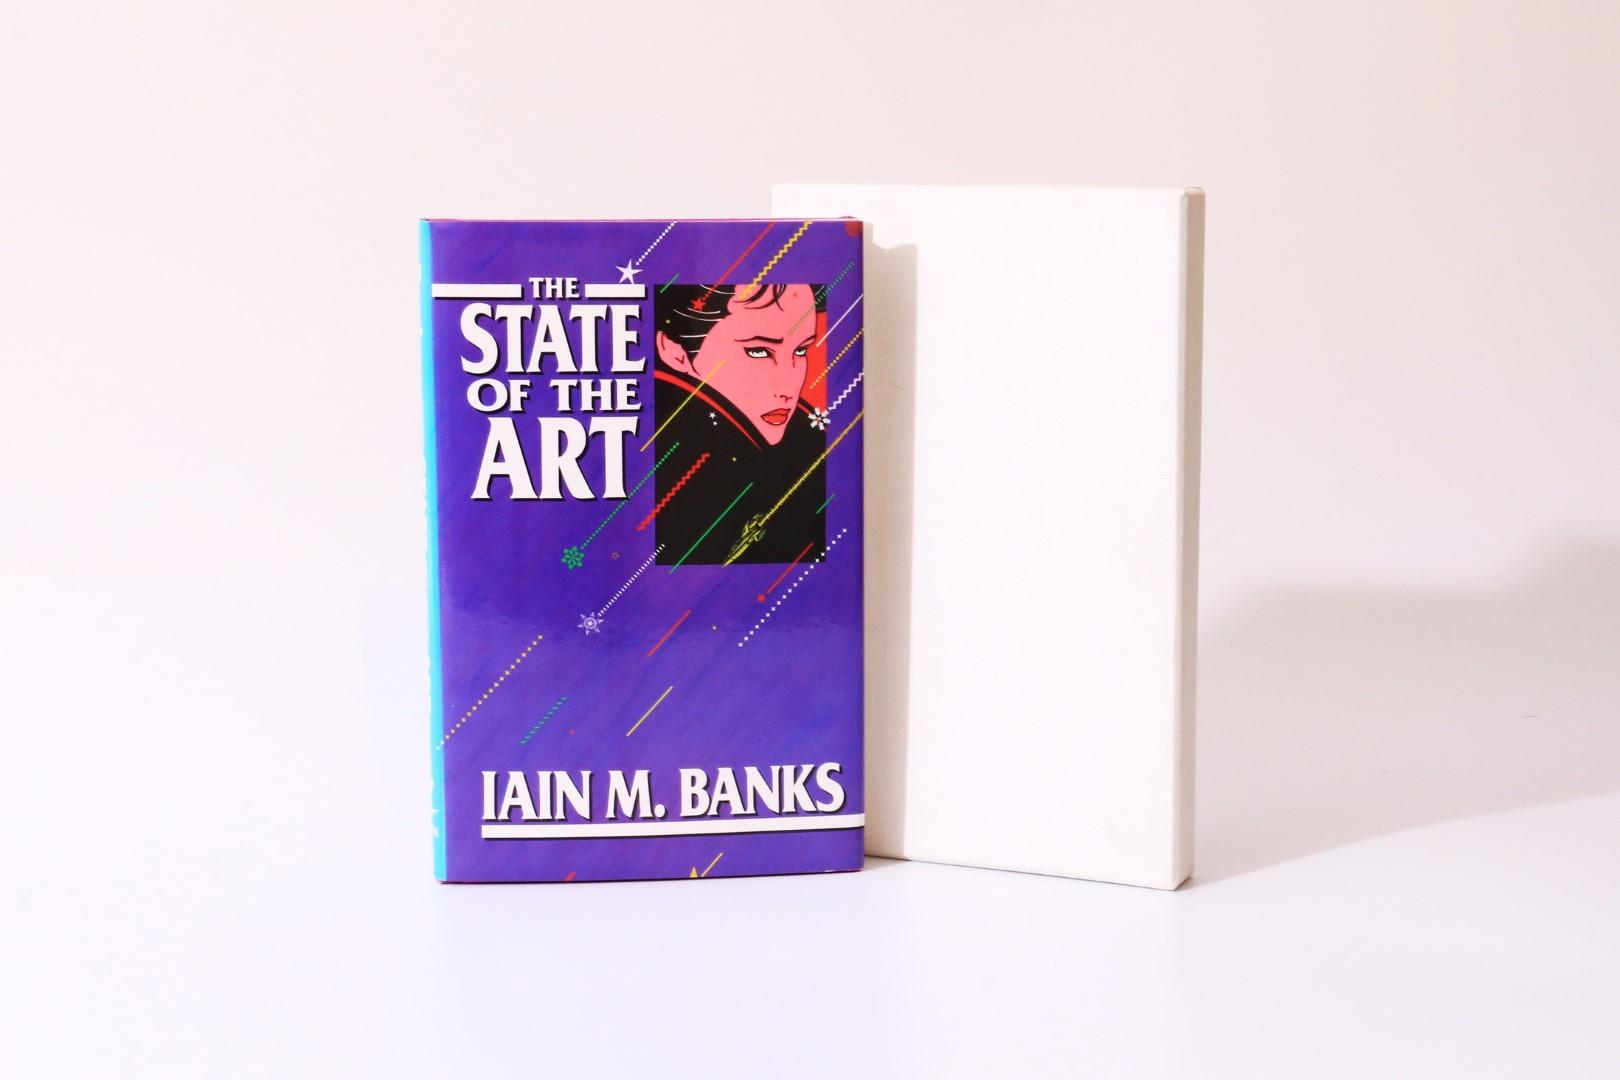 Iain M. Banks - The State of the Art - Mark V. Ziesing, 1989, Signed Limited Edition.